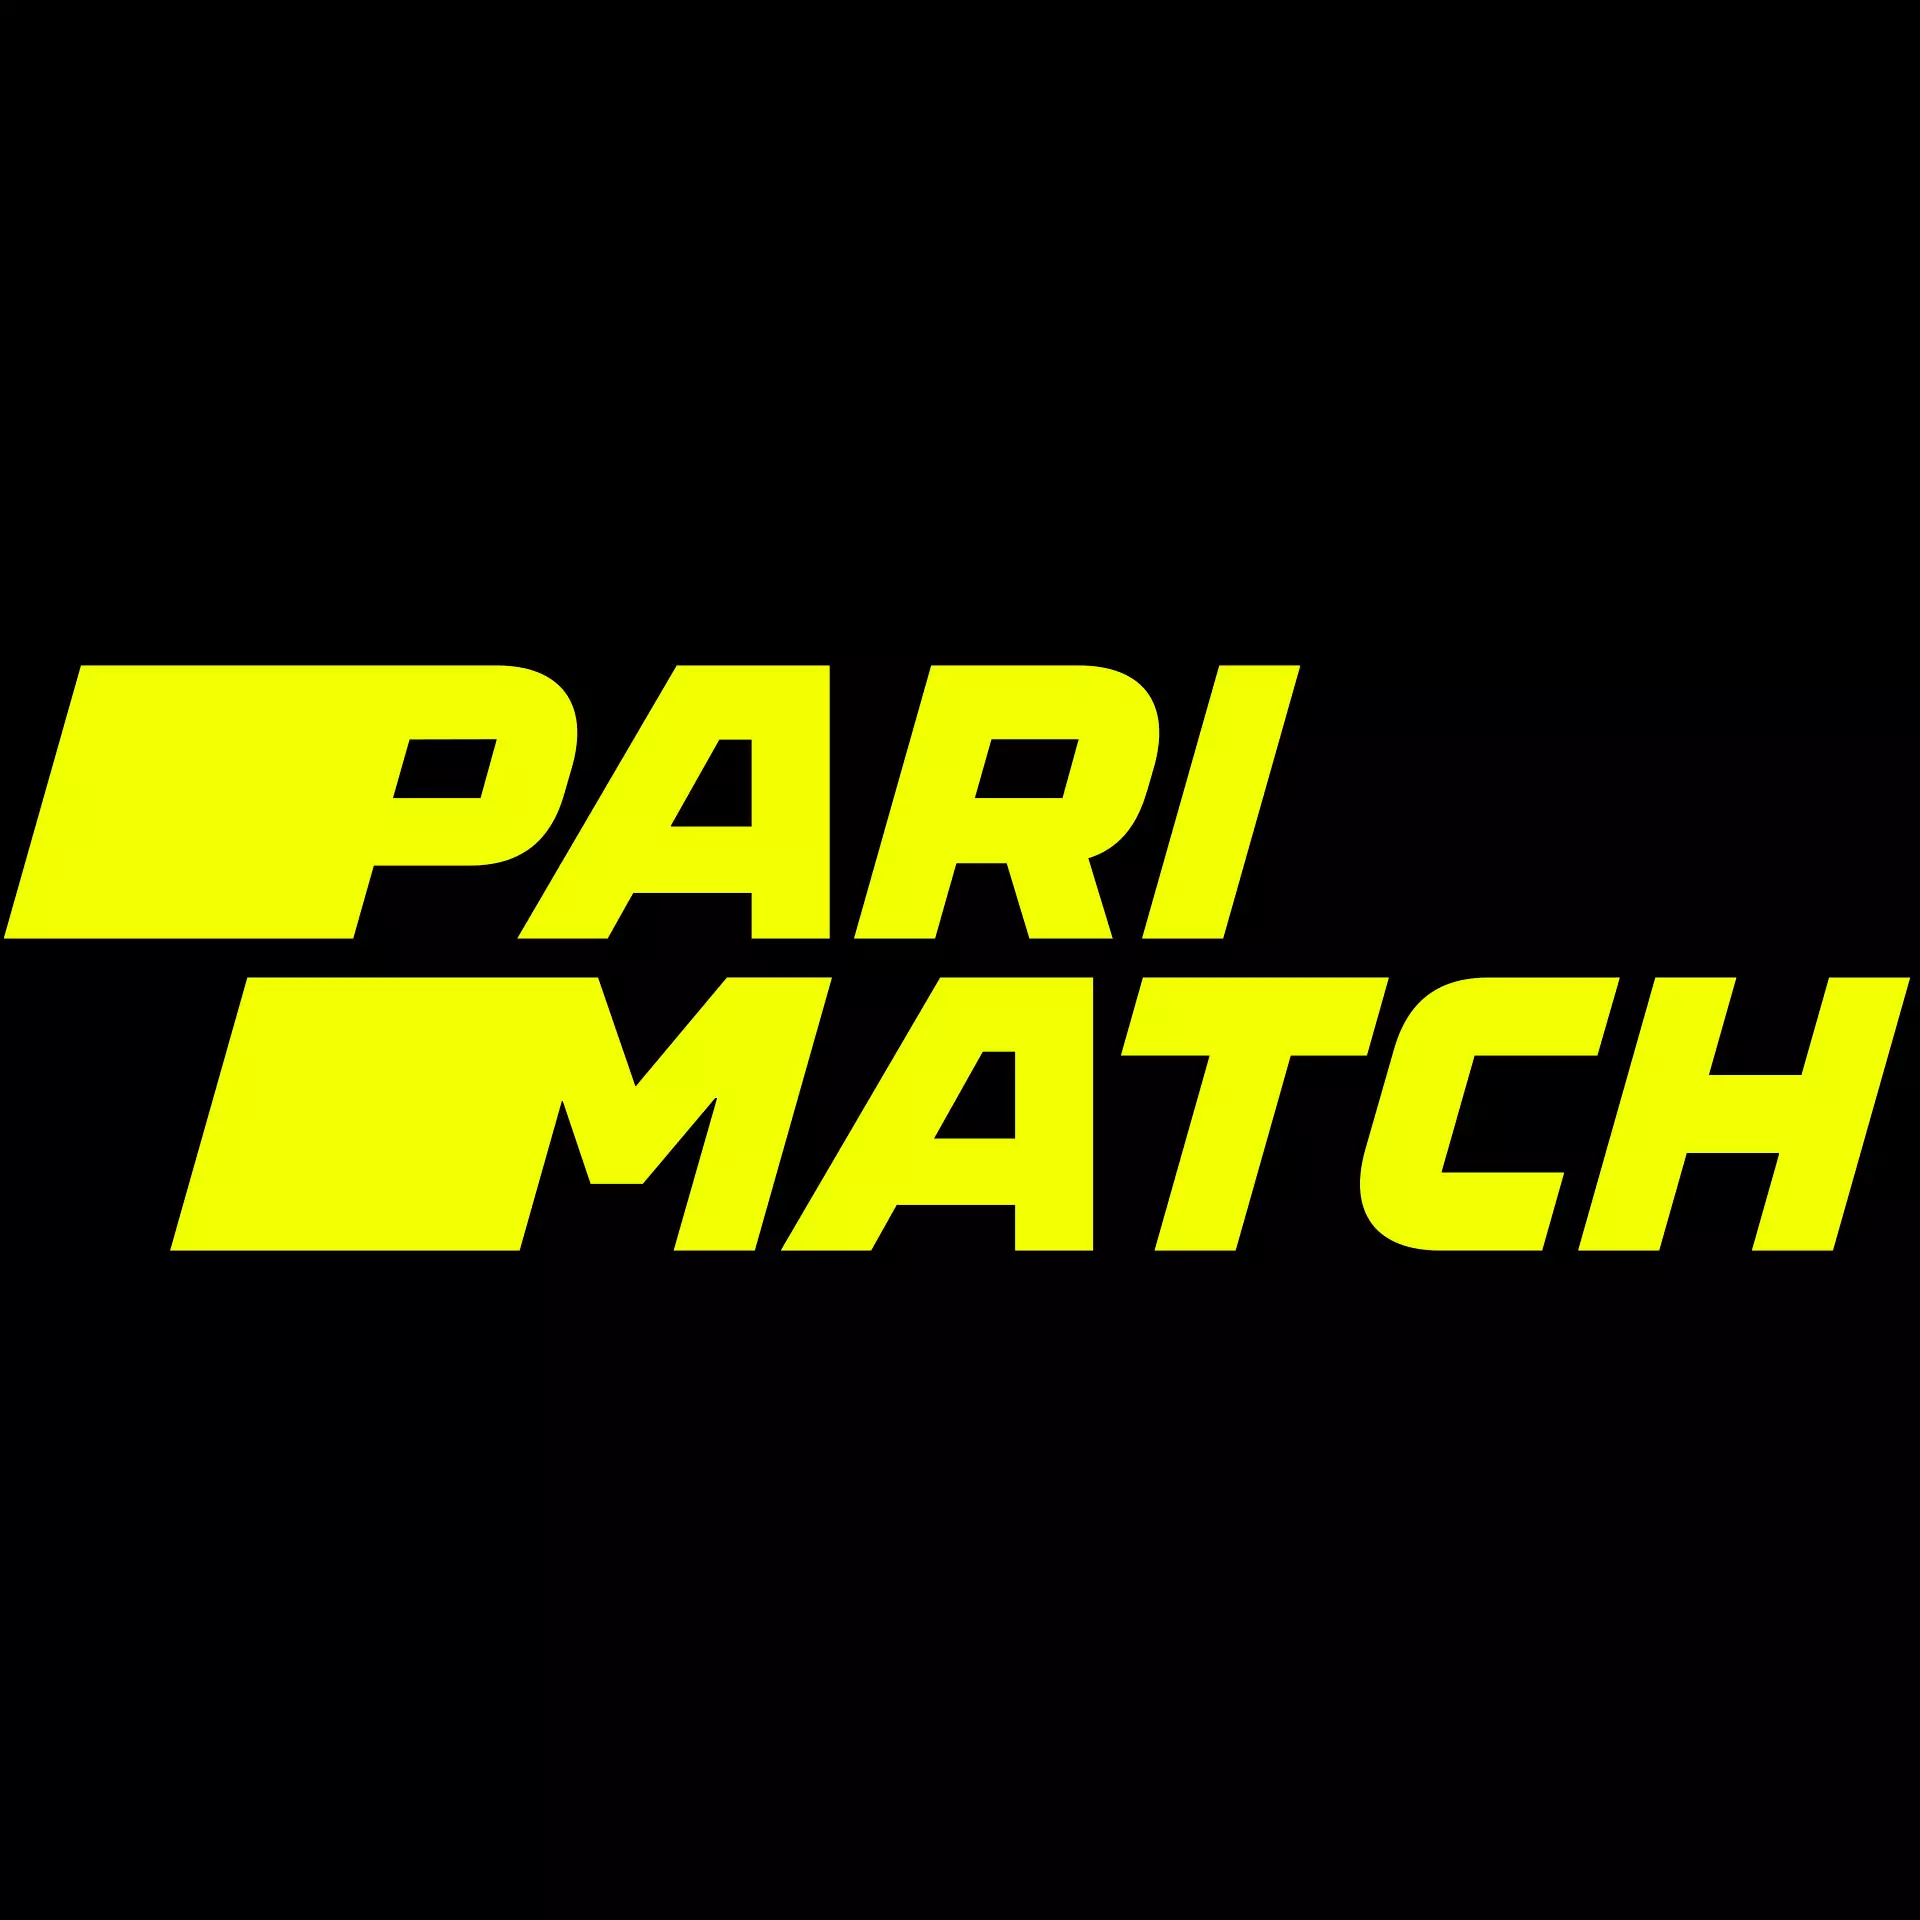 Parimatch is most popular cricket betting sites in India.